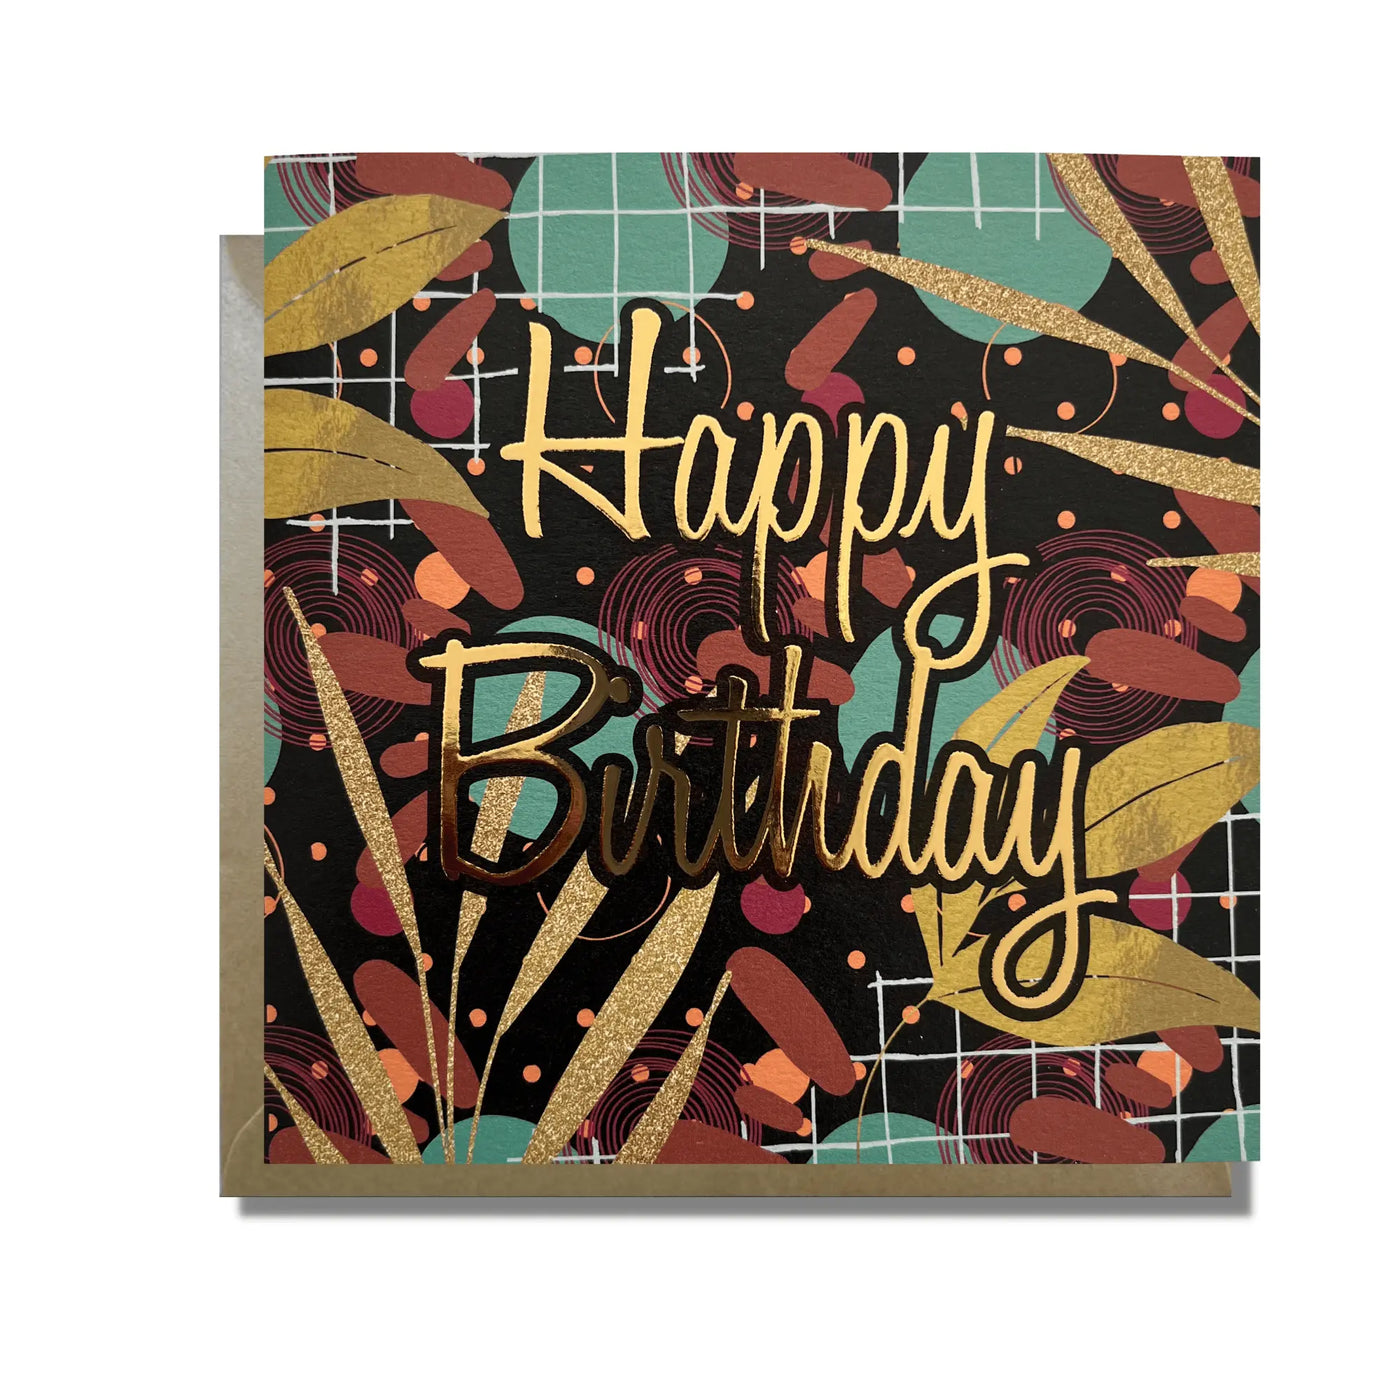 Happy Birthday Card by Afrotouch - Migration Museum Shop